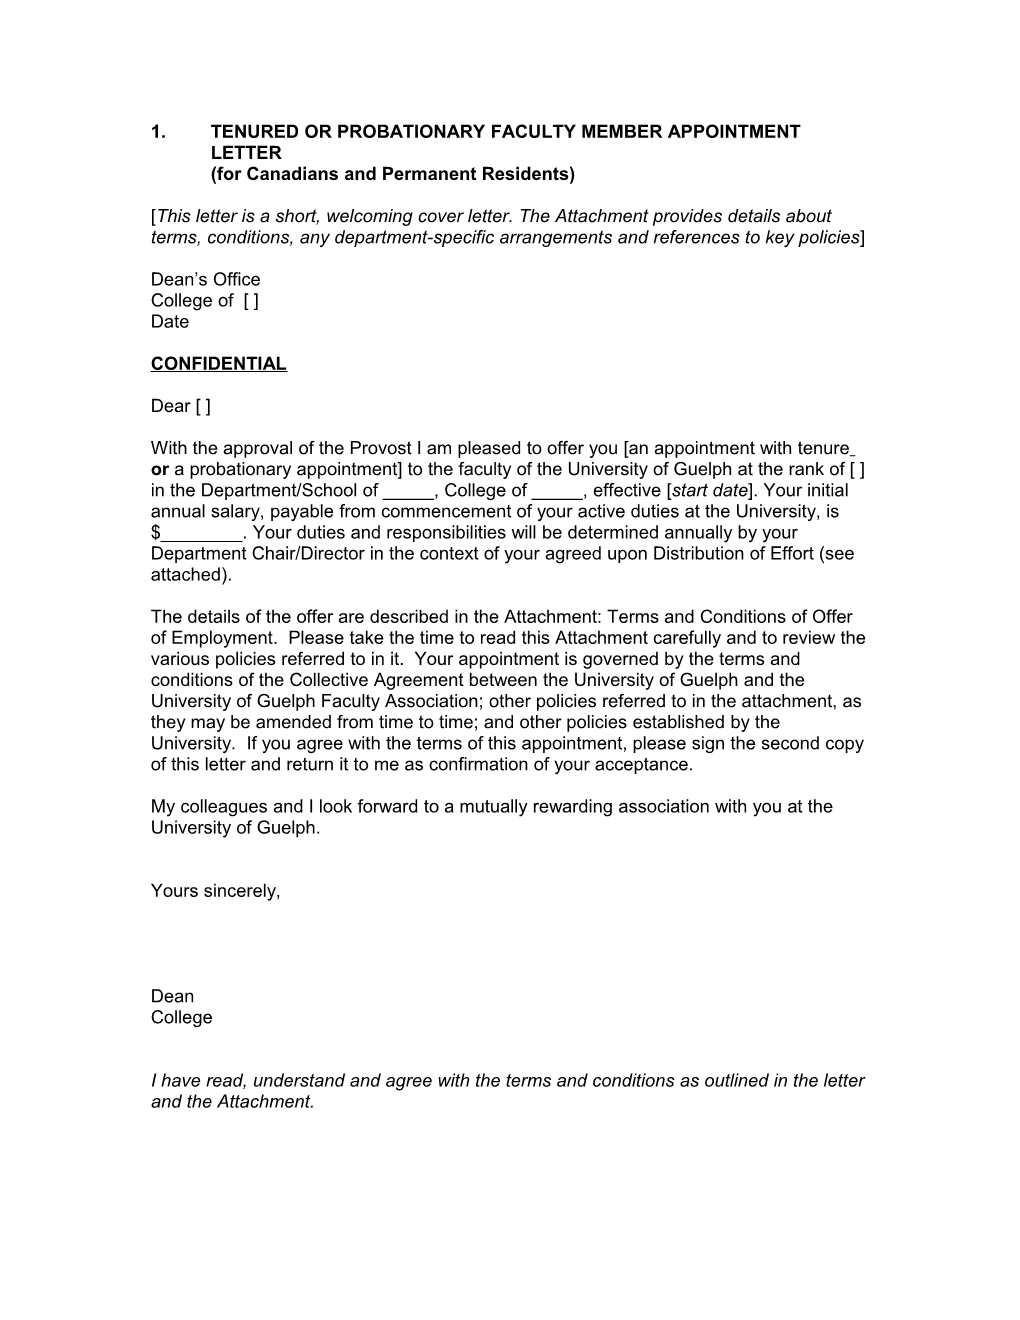 Letter to Be Used in the Case of a Tenured Or Probationary Appointment